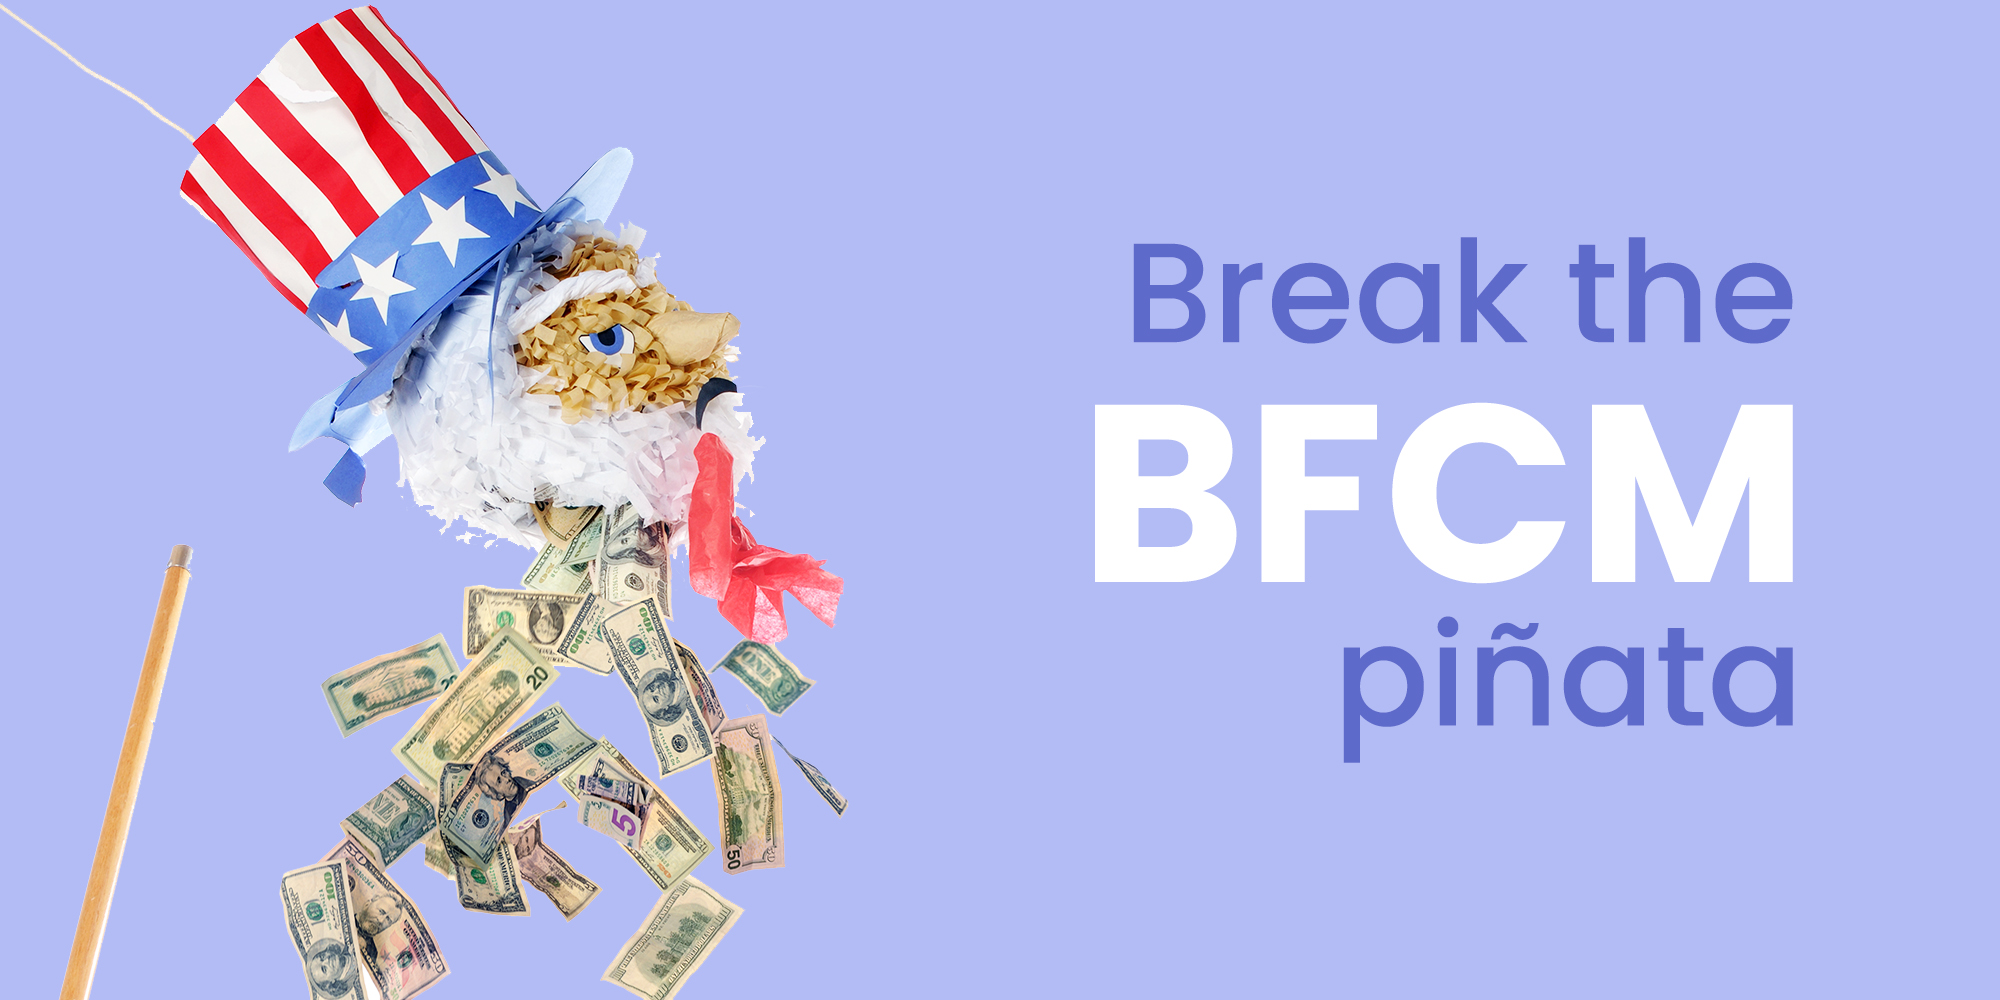 Break the BFCM Piñata with this Guide on designing Black Friday offers.